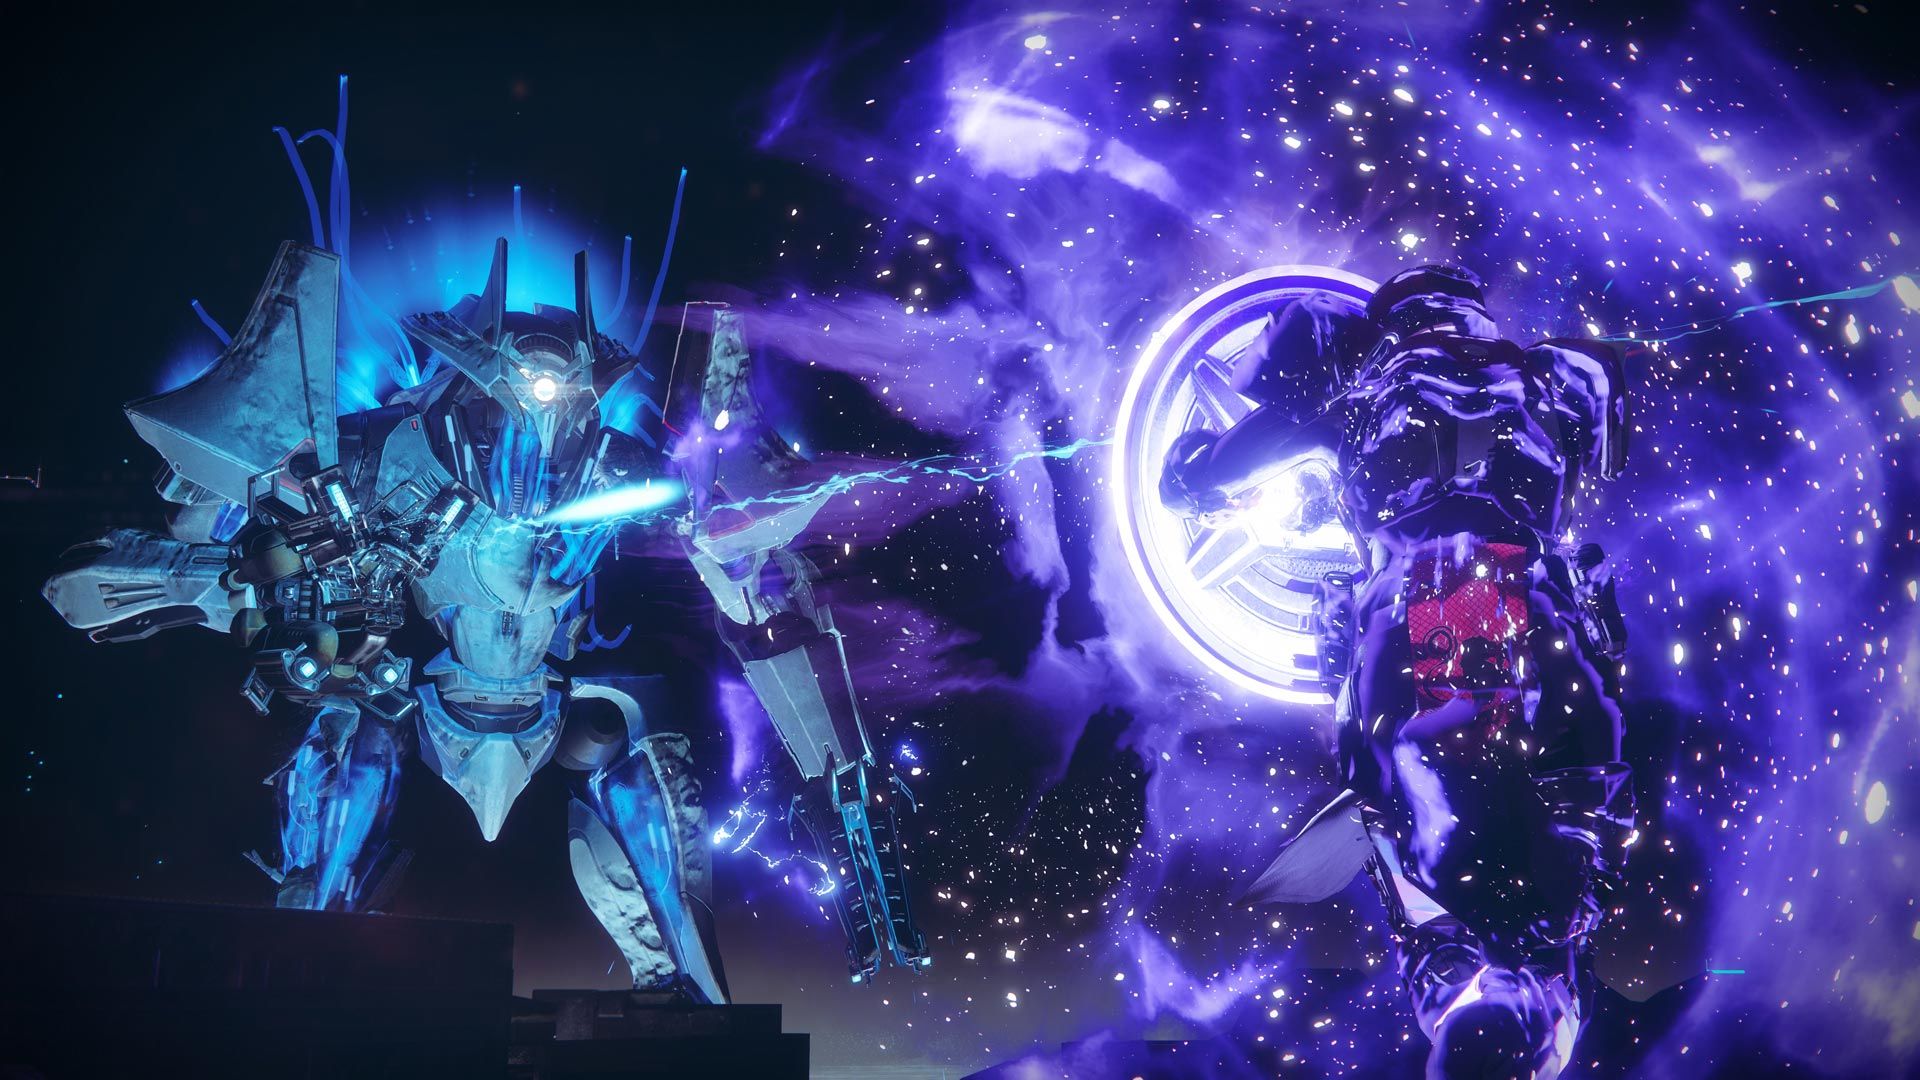 Destiny 2 classes: The Titan Void subclass charging with a shield